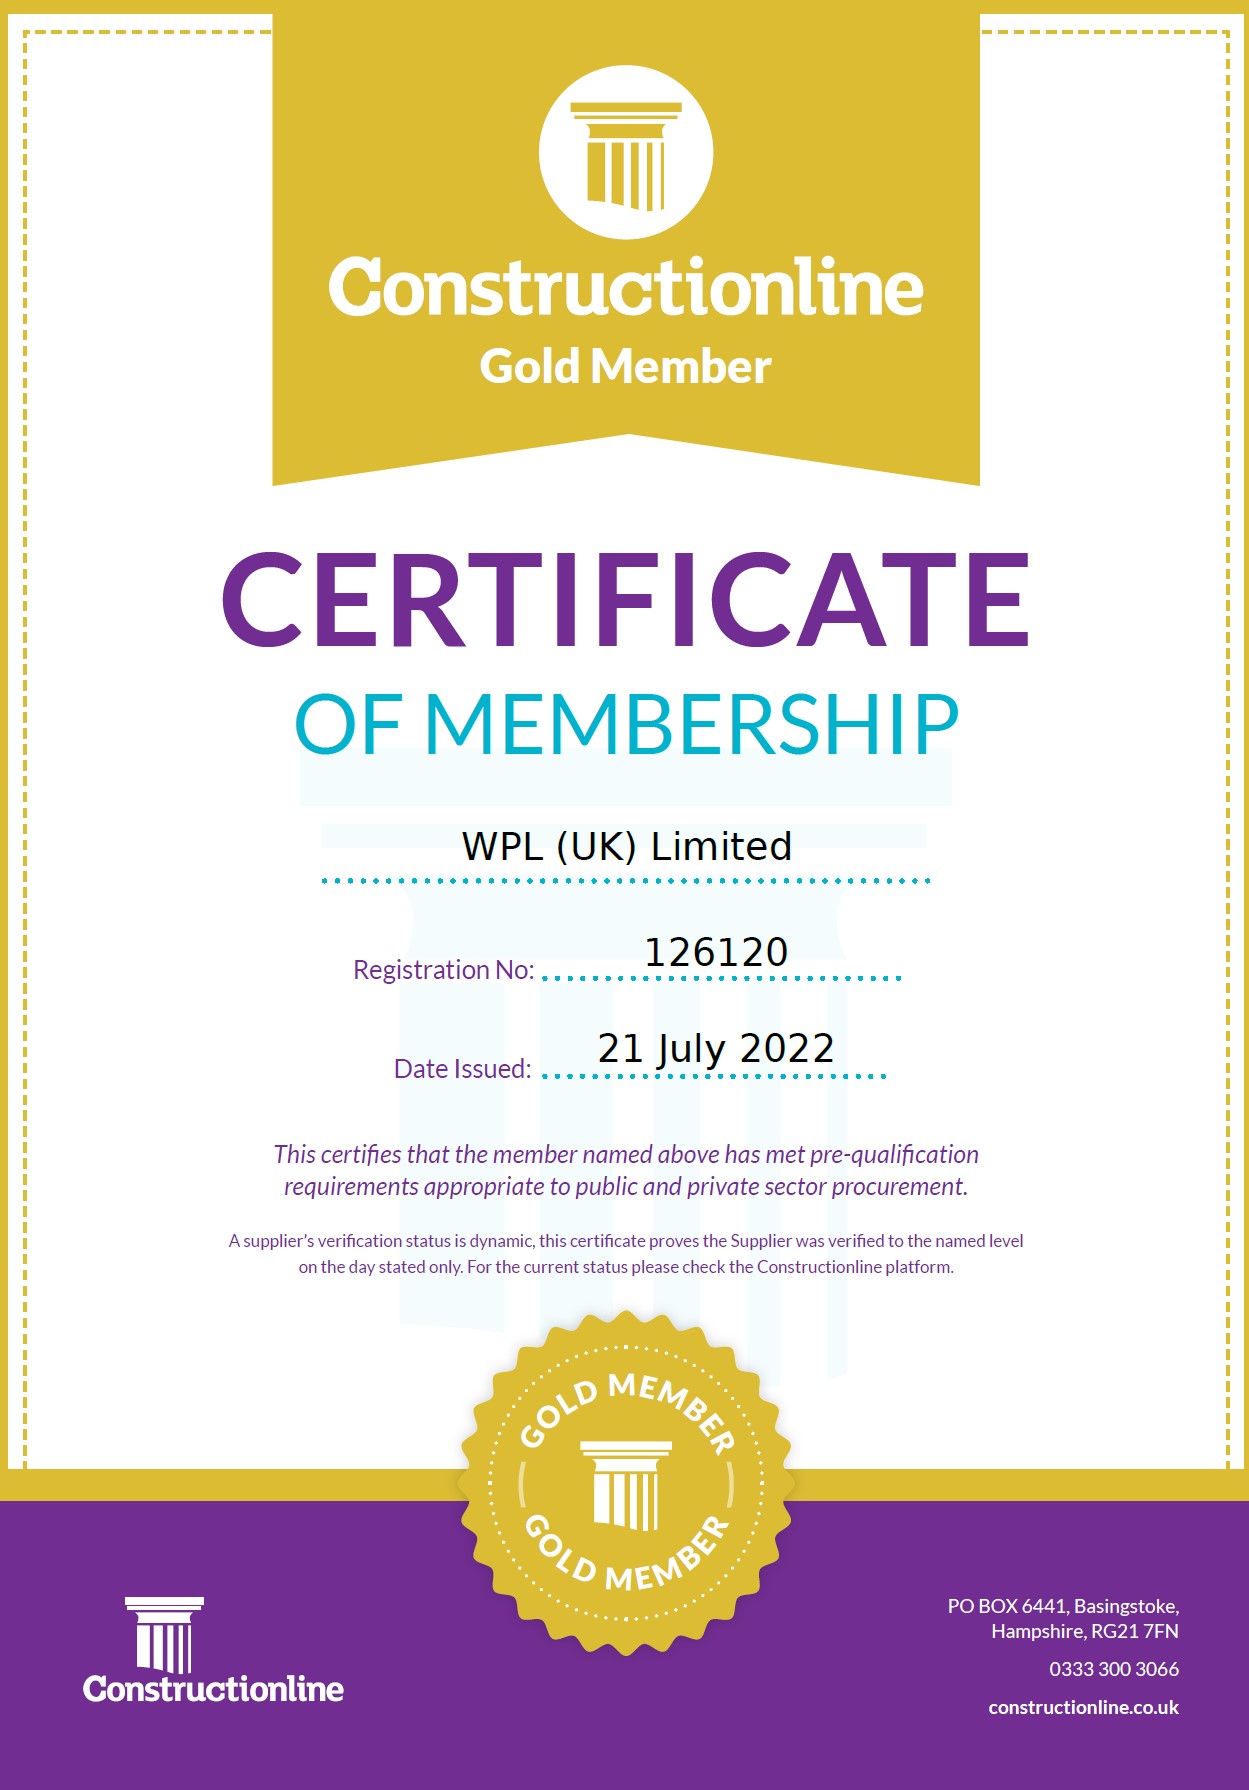 WPLUK Constructionline GOLD Certificate Issued 21st July 2022